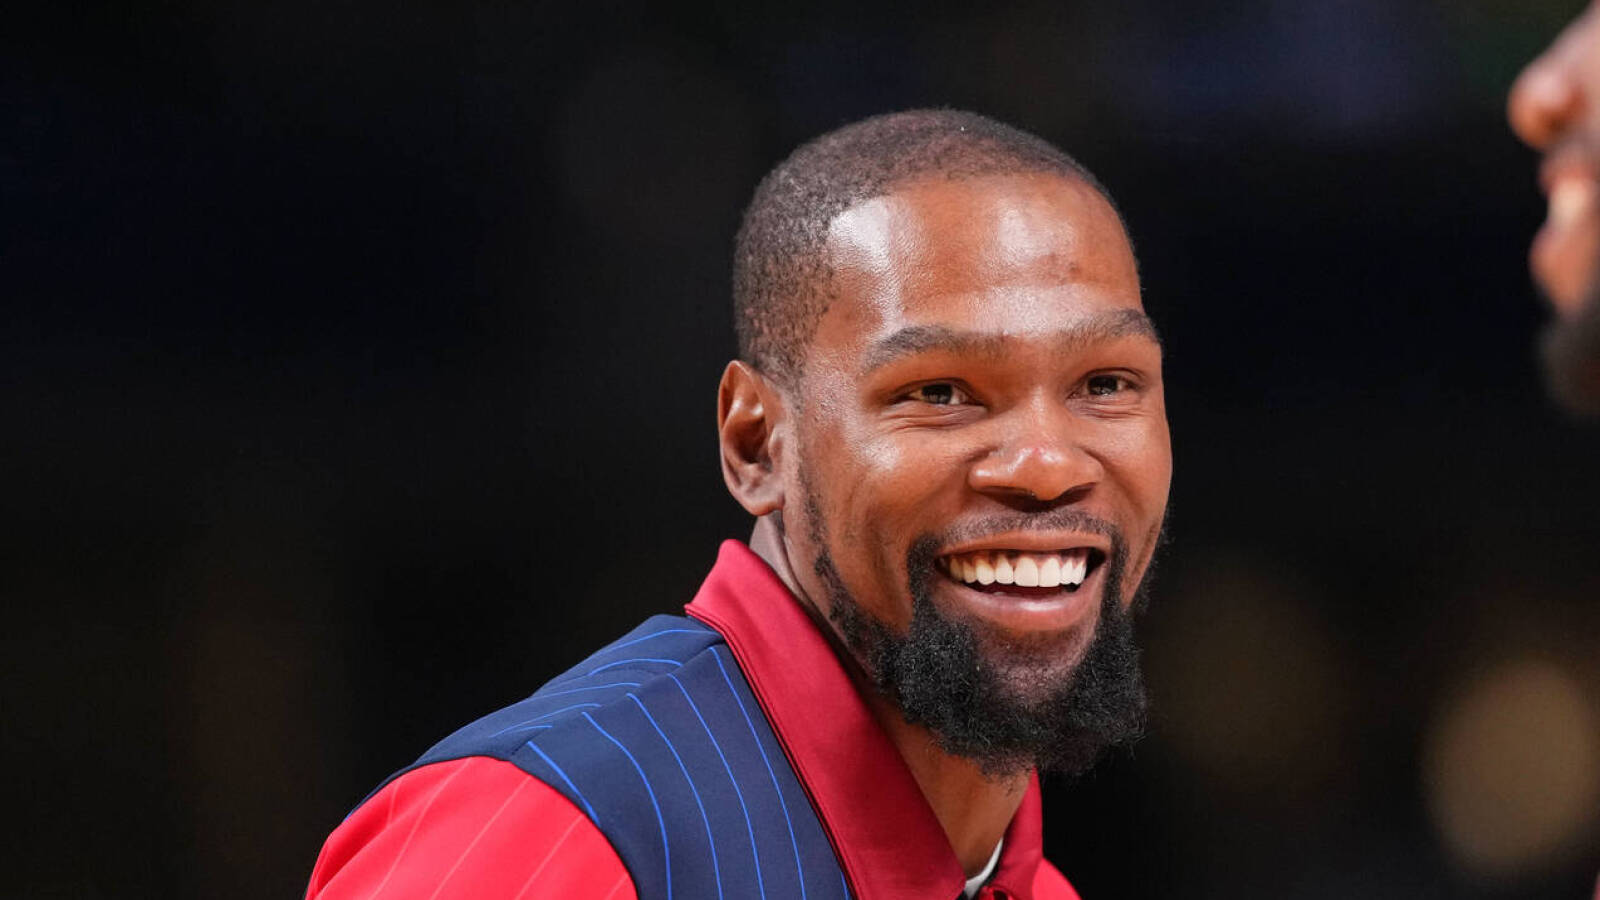 Kevin Durant ignored family's wishes when he joined Nets